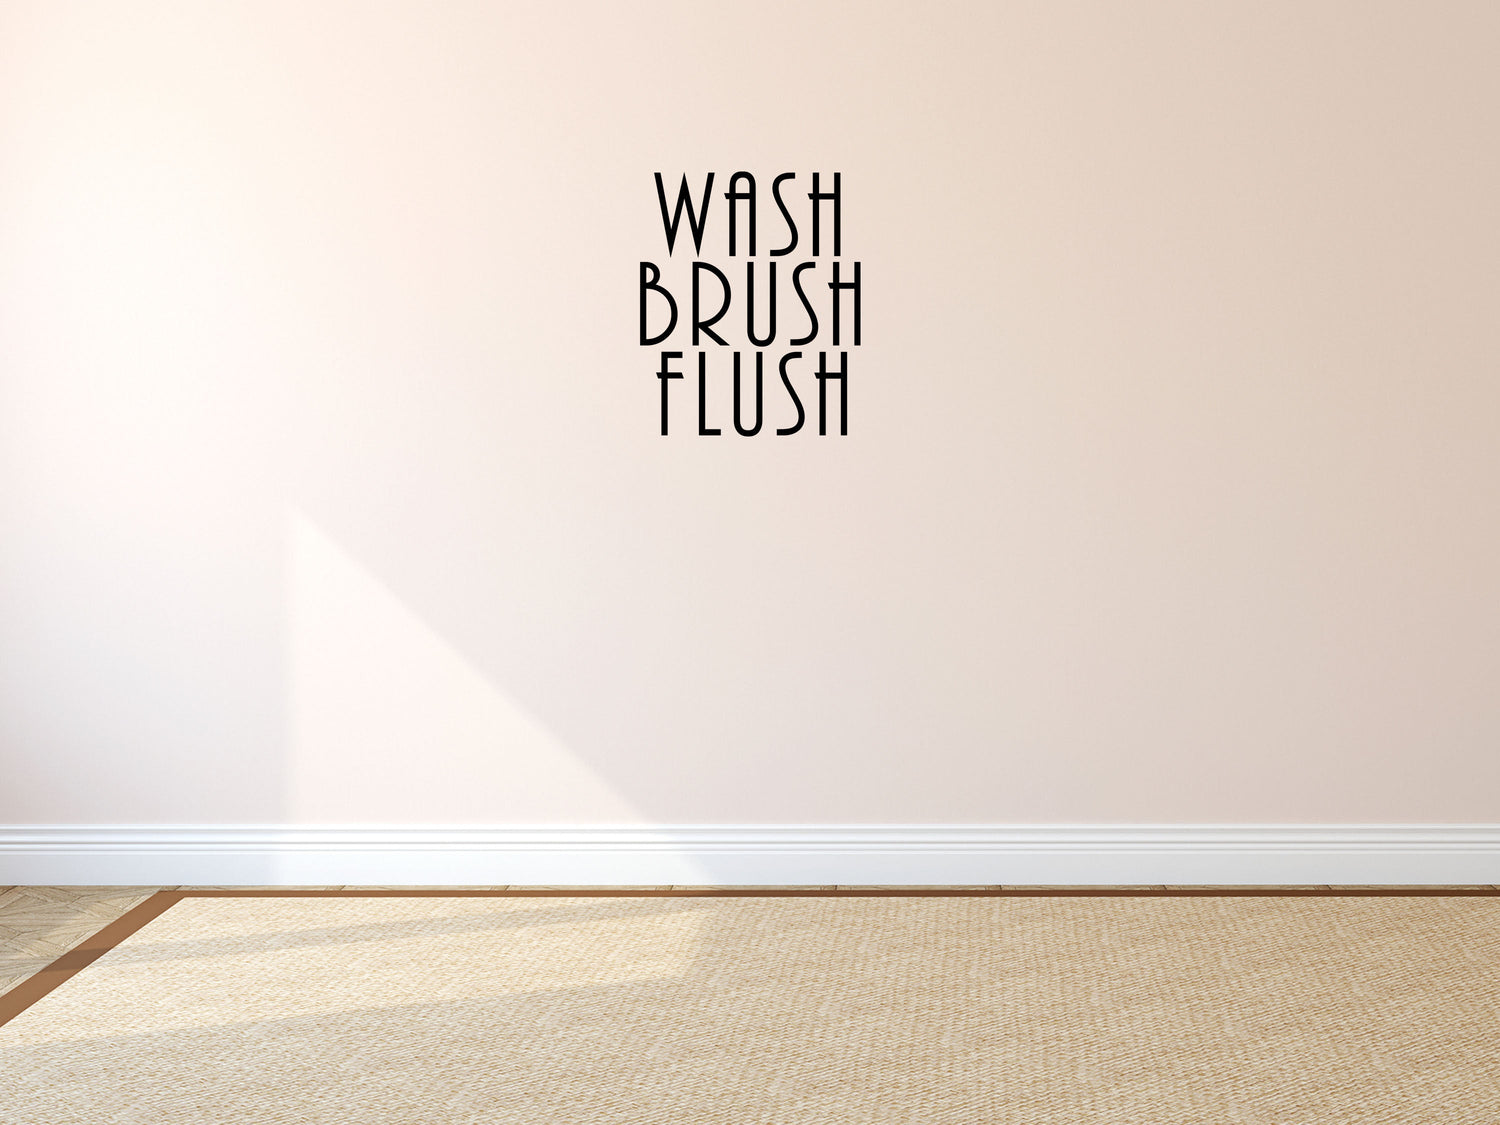 Wash Brush Flush Bathroom Wall Art Quote - Bathroom Wall Quotes Stickers Vinyl Wall Decal Title Done 